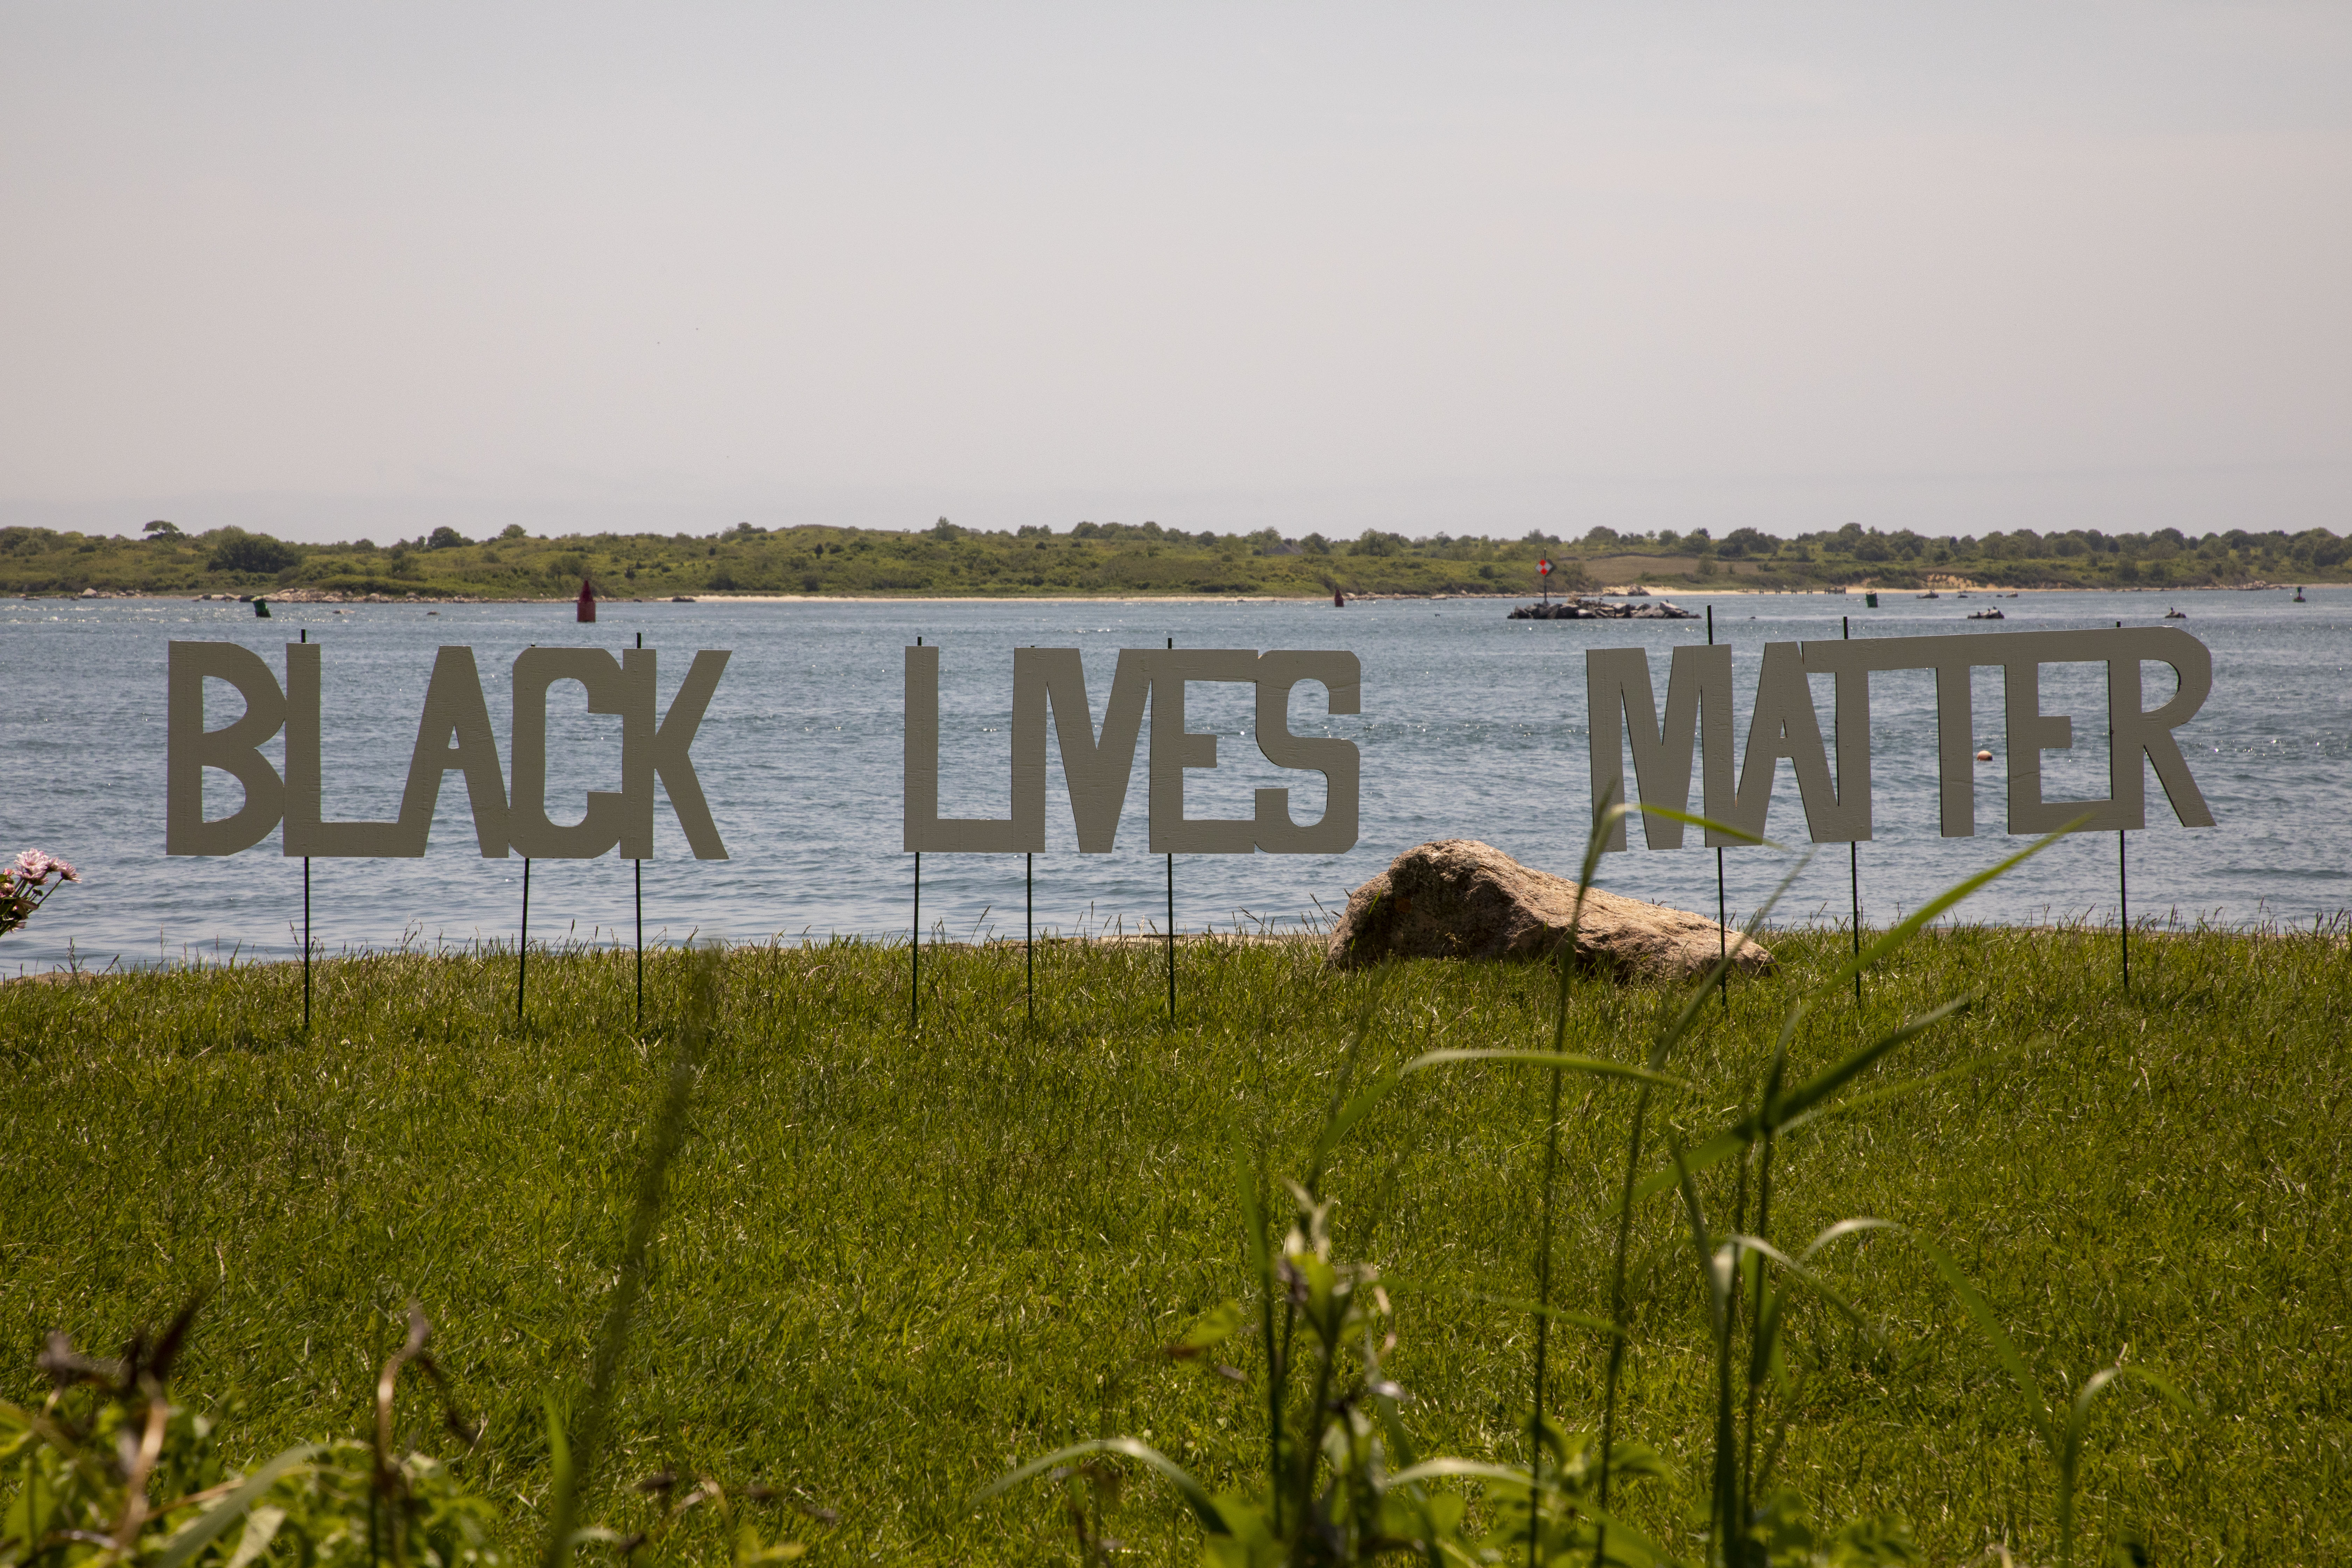 Photography of block letter cutouts on stakes planted in the grass spelling out "Black Lives Matter". The picture is composed in thirds, low third is green grass, middle third is the words against a background of blue water, and the top third is a milky overcast sky.